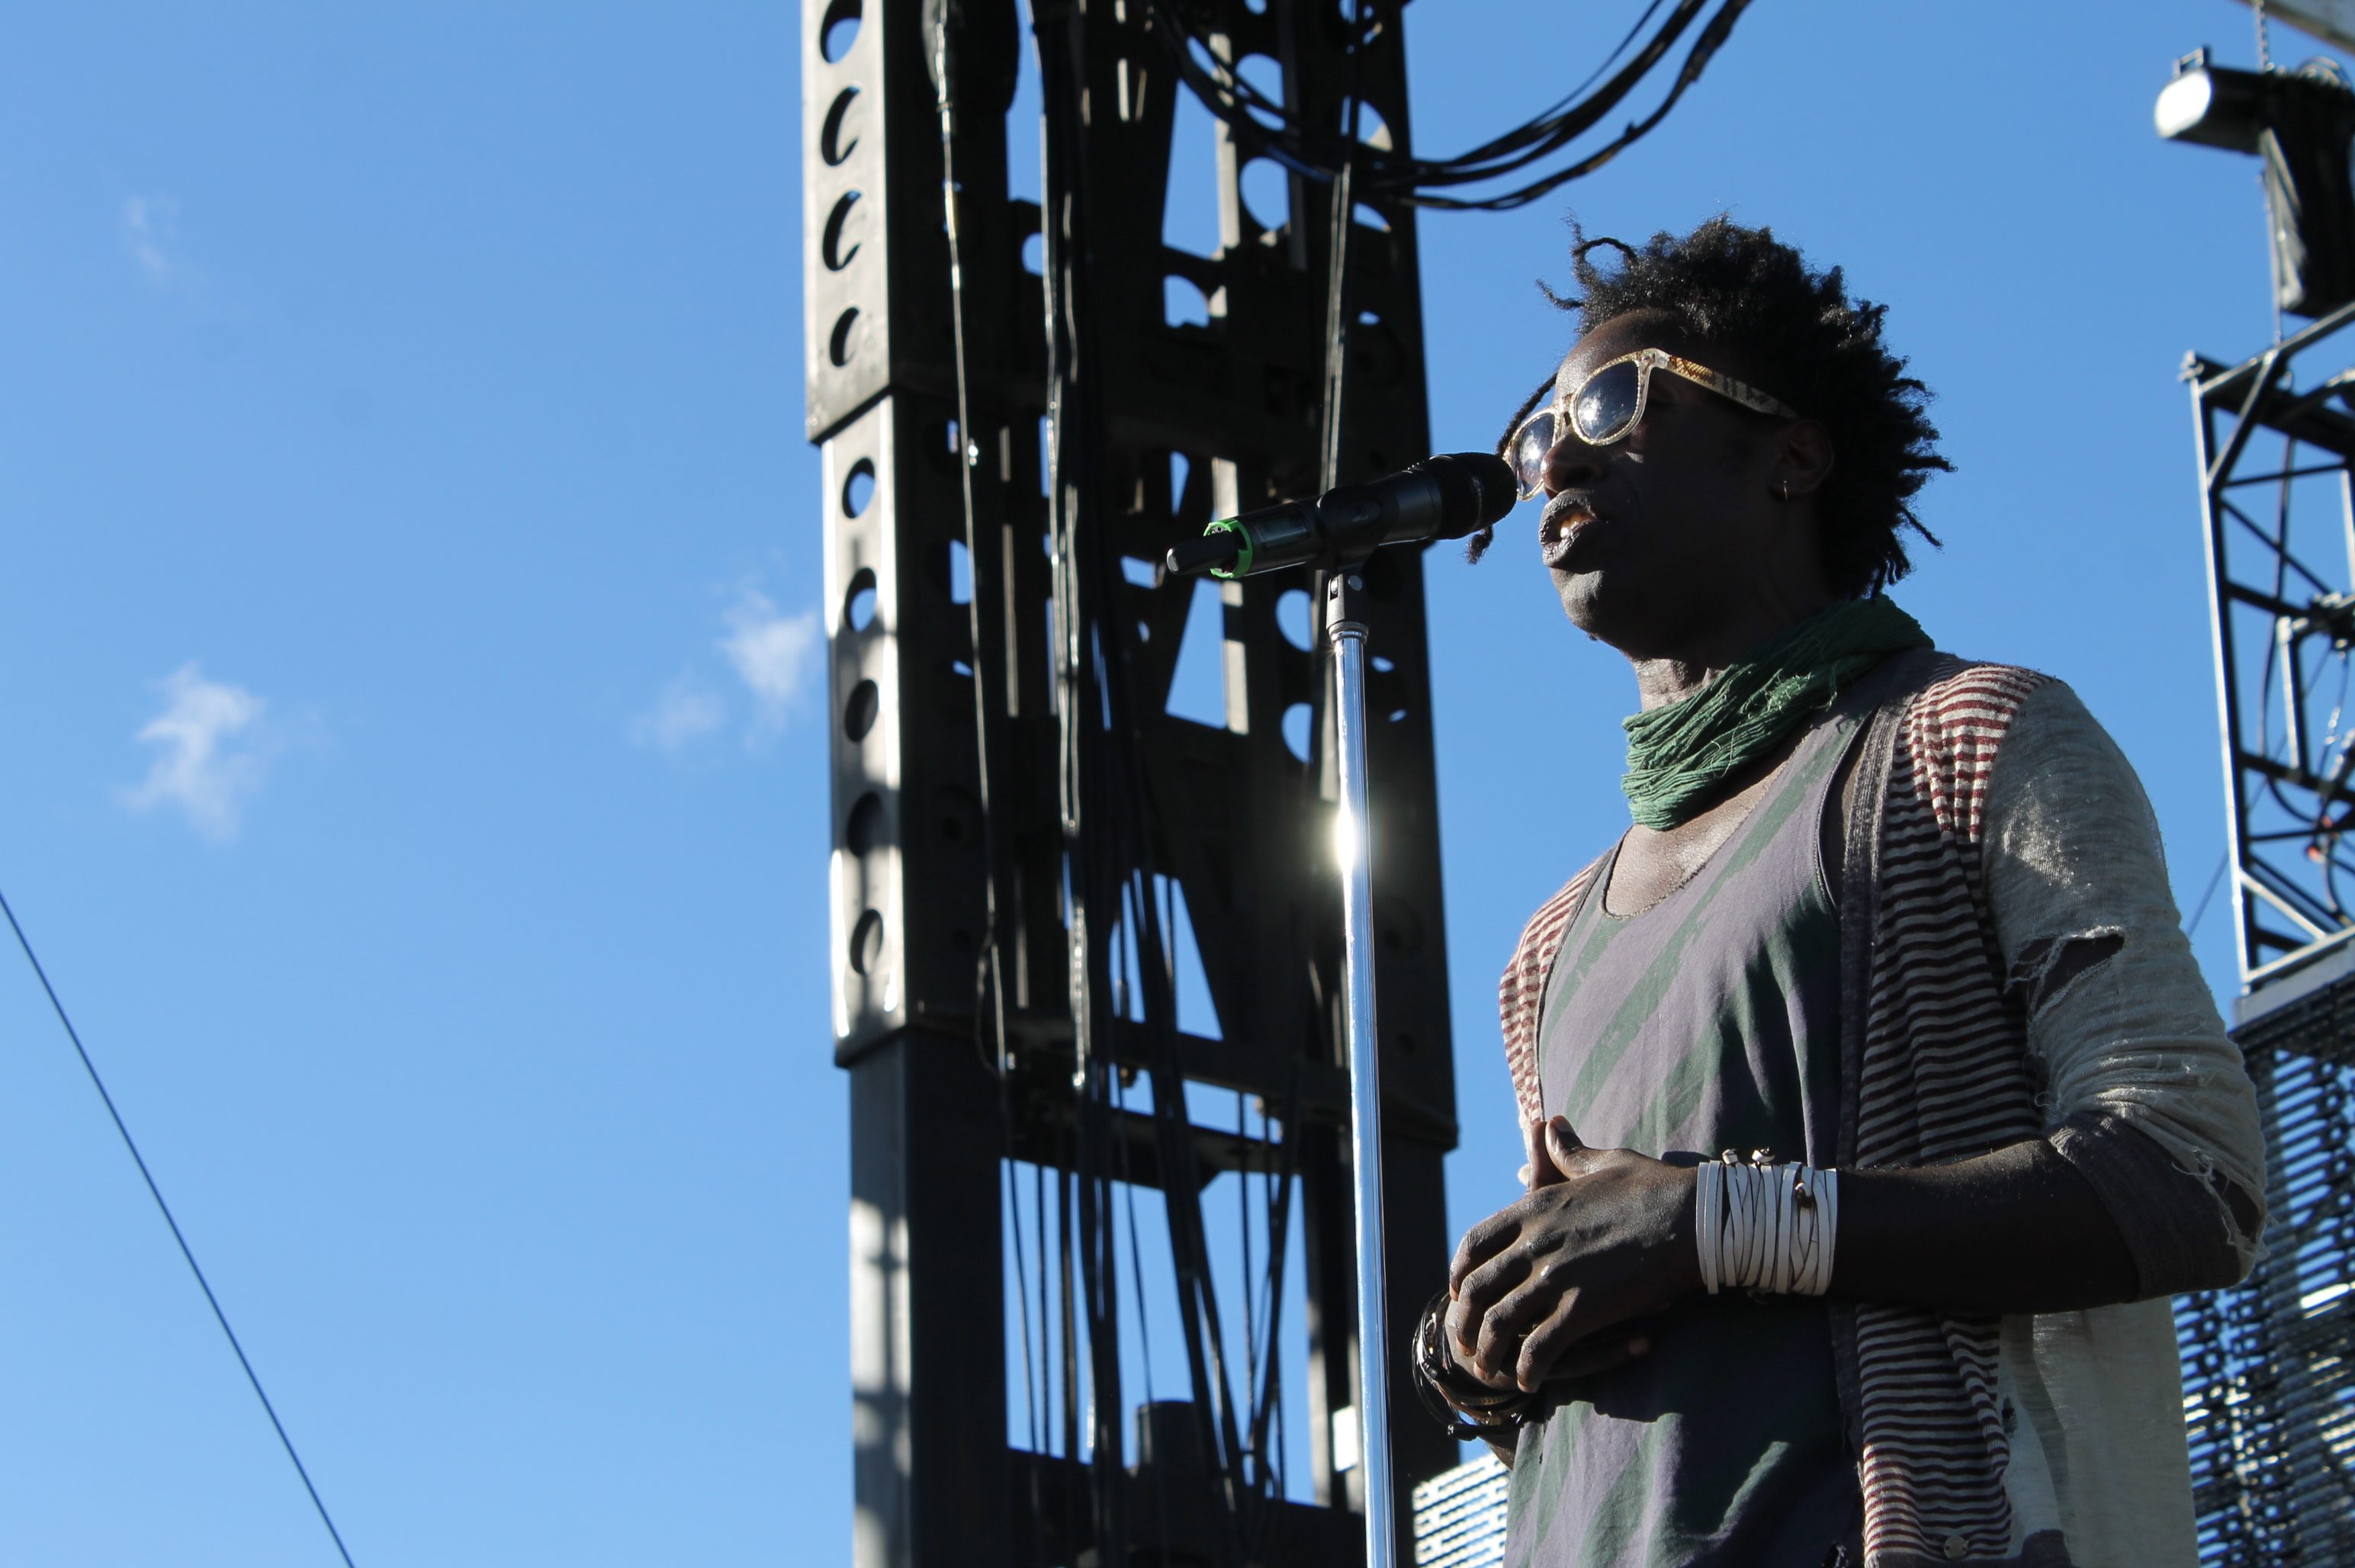 Saul Williams Announces Original Soundtrack For Neptune Frost For July 2022 Release, Shares New Track “Pensent Comme Leurs Livres Disent (Think Like They Book Say)”